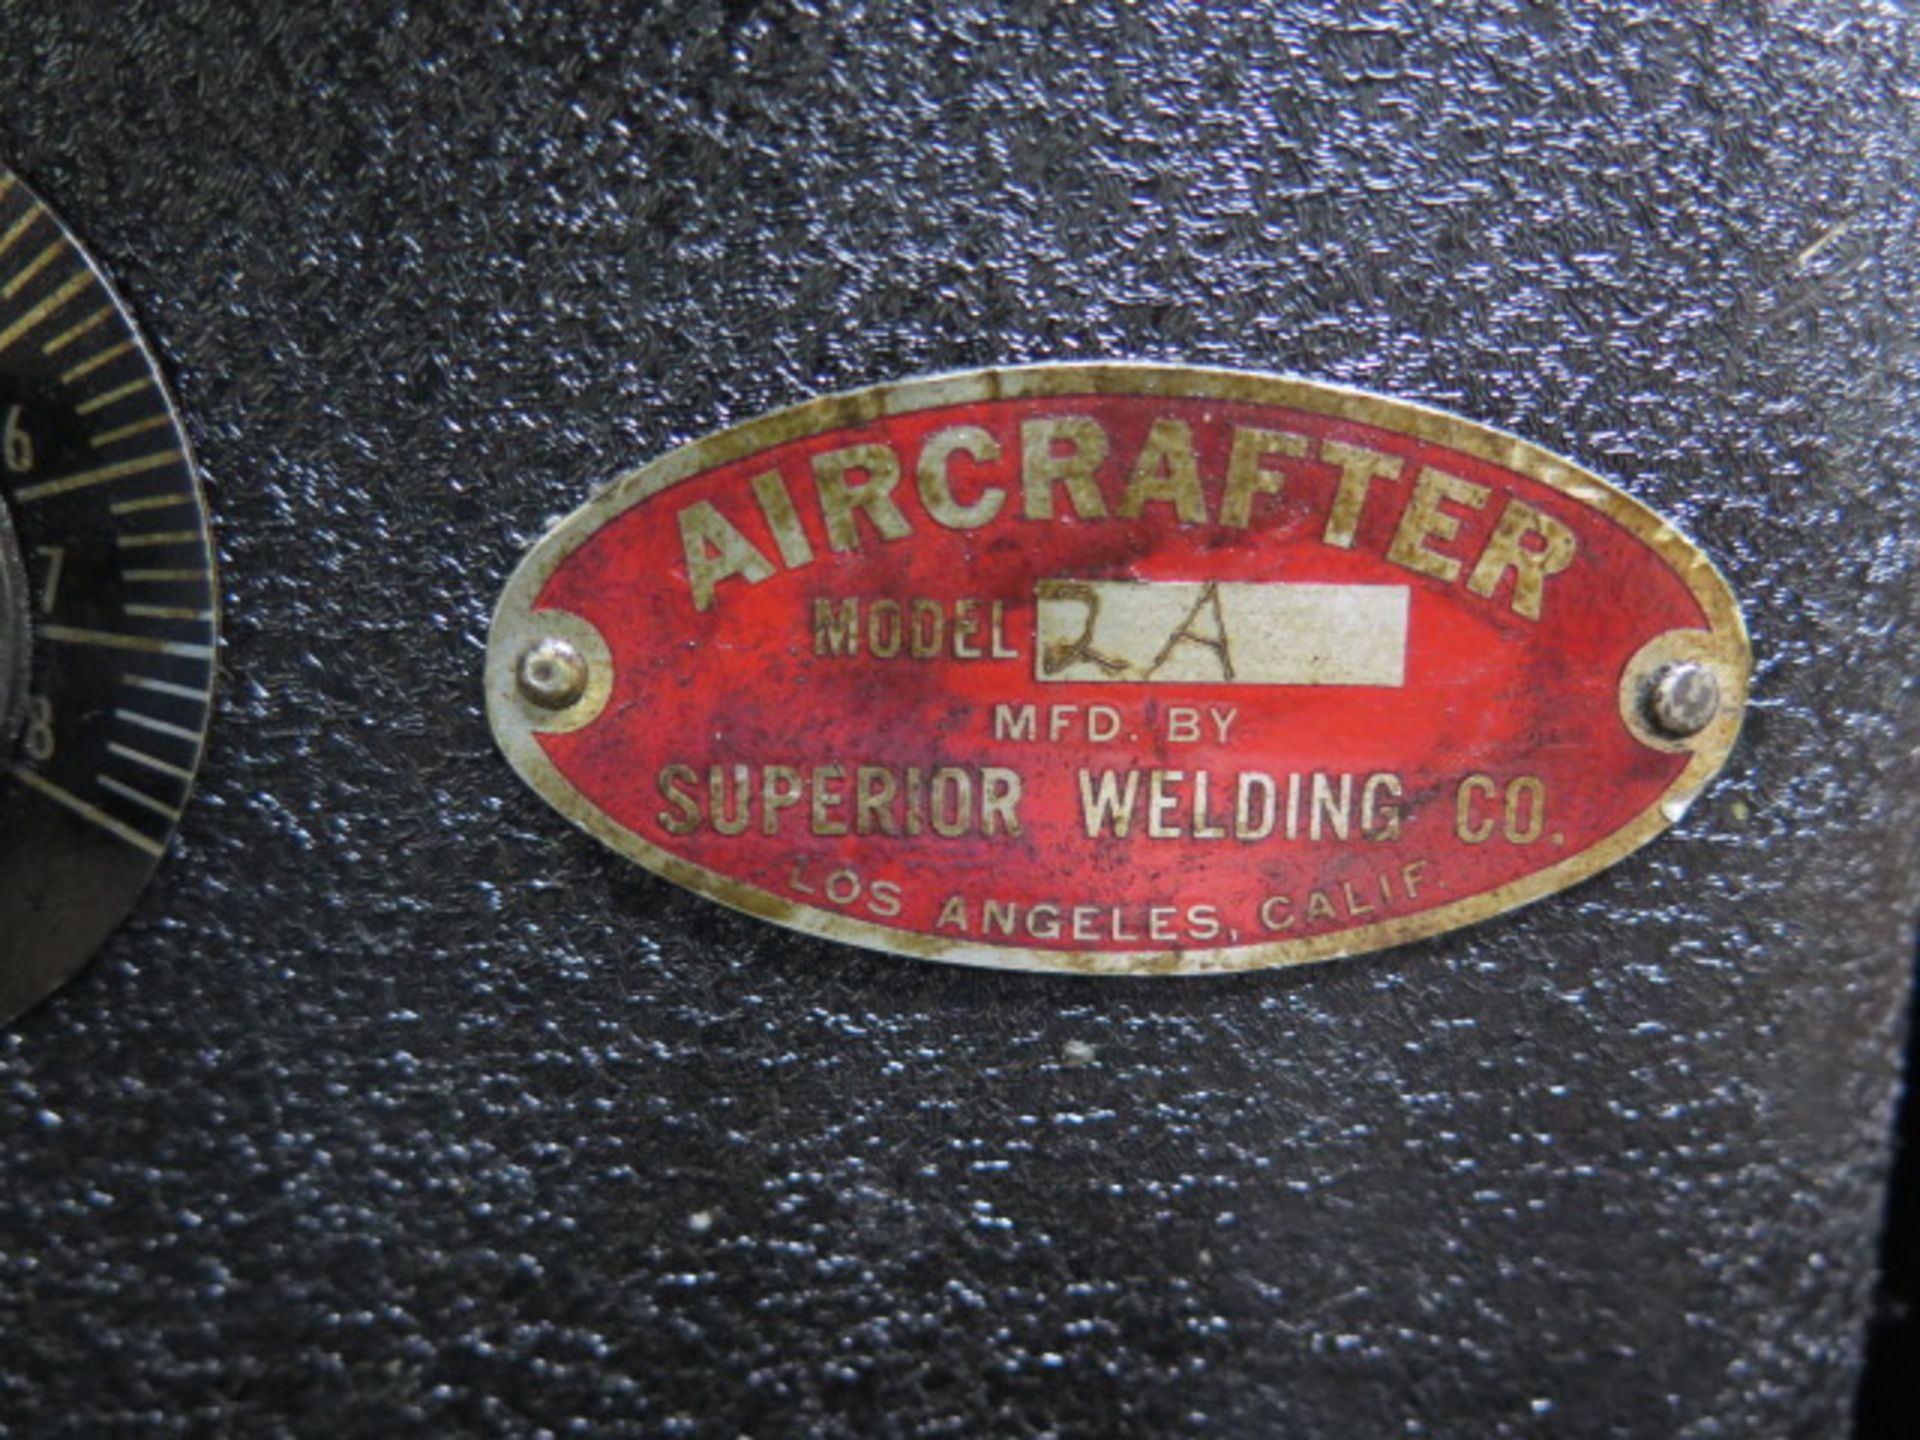 MK Aircrafter Welding Positioner (SOLD AS-IS - NO WARRANTY) - Image 6 of 6